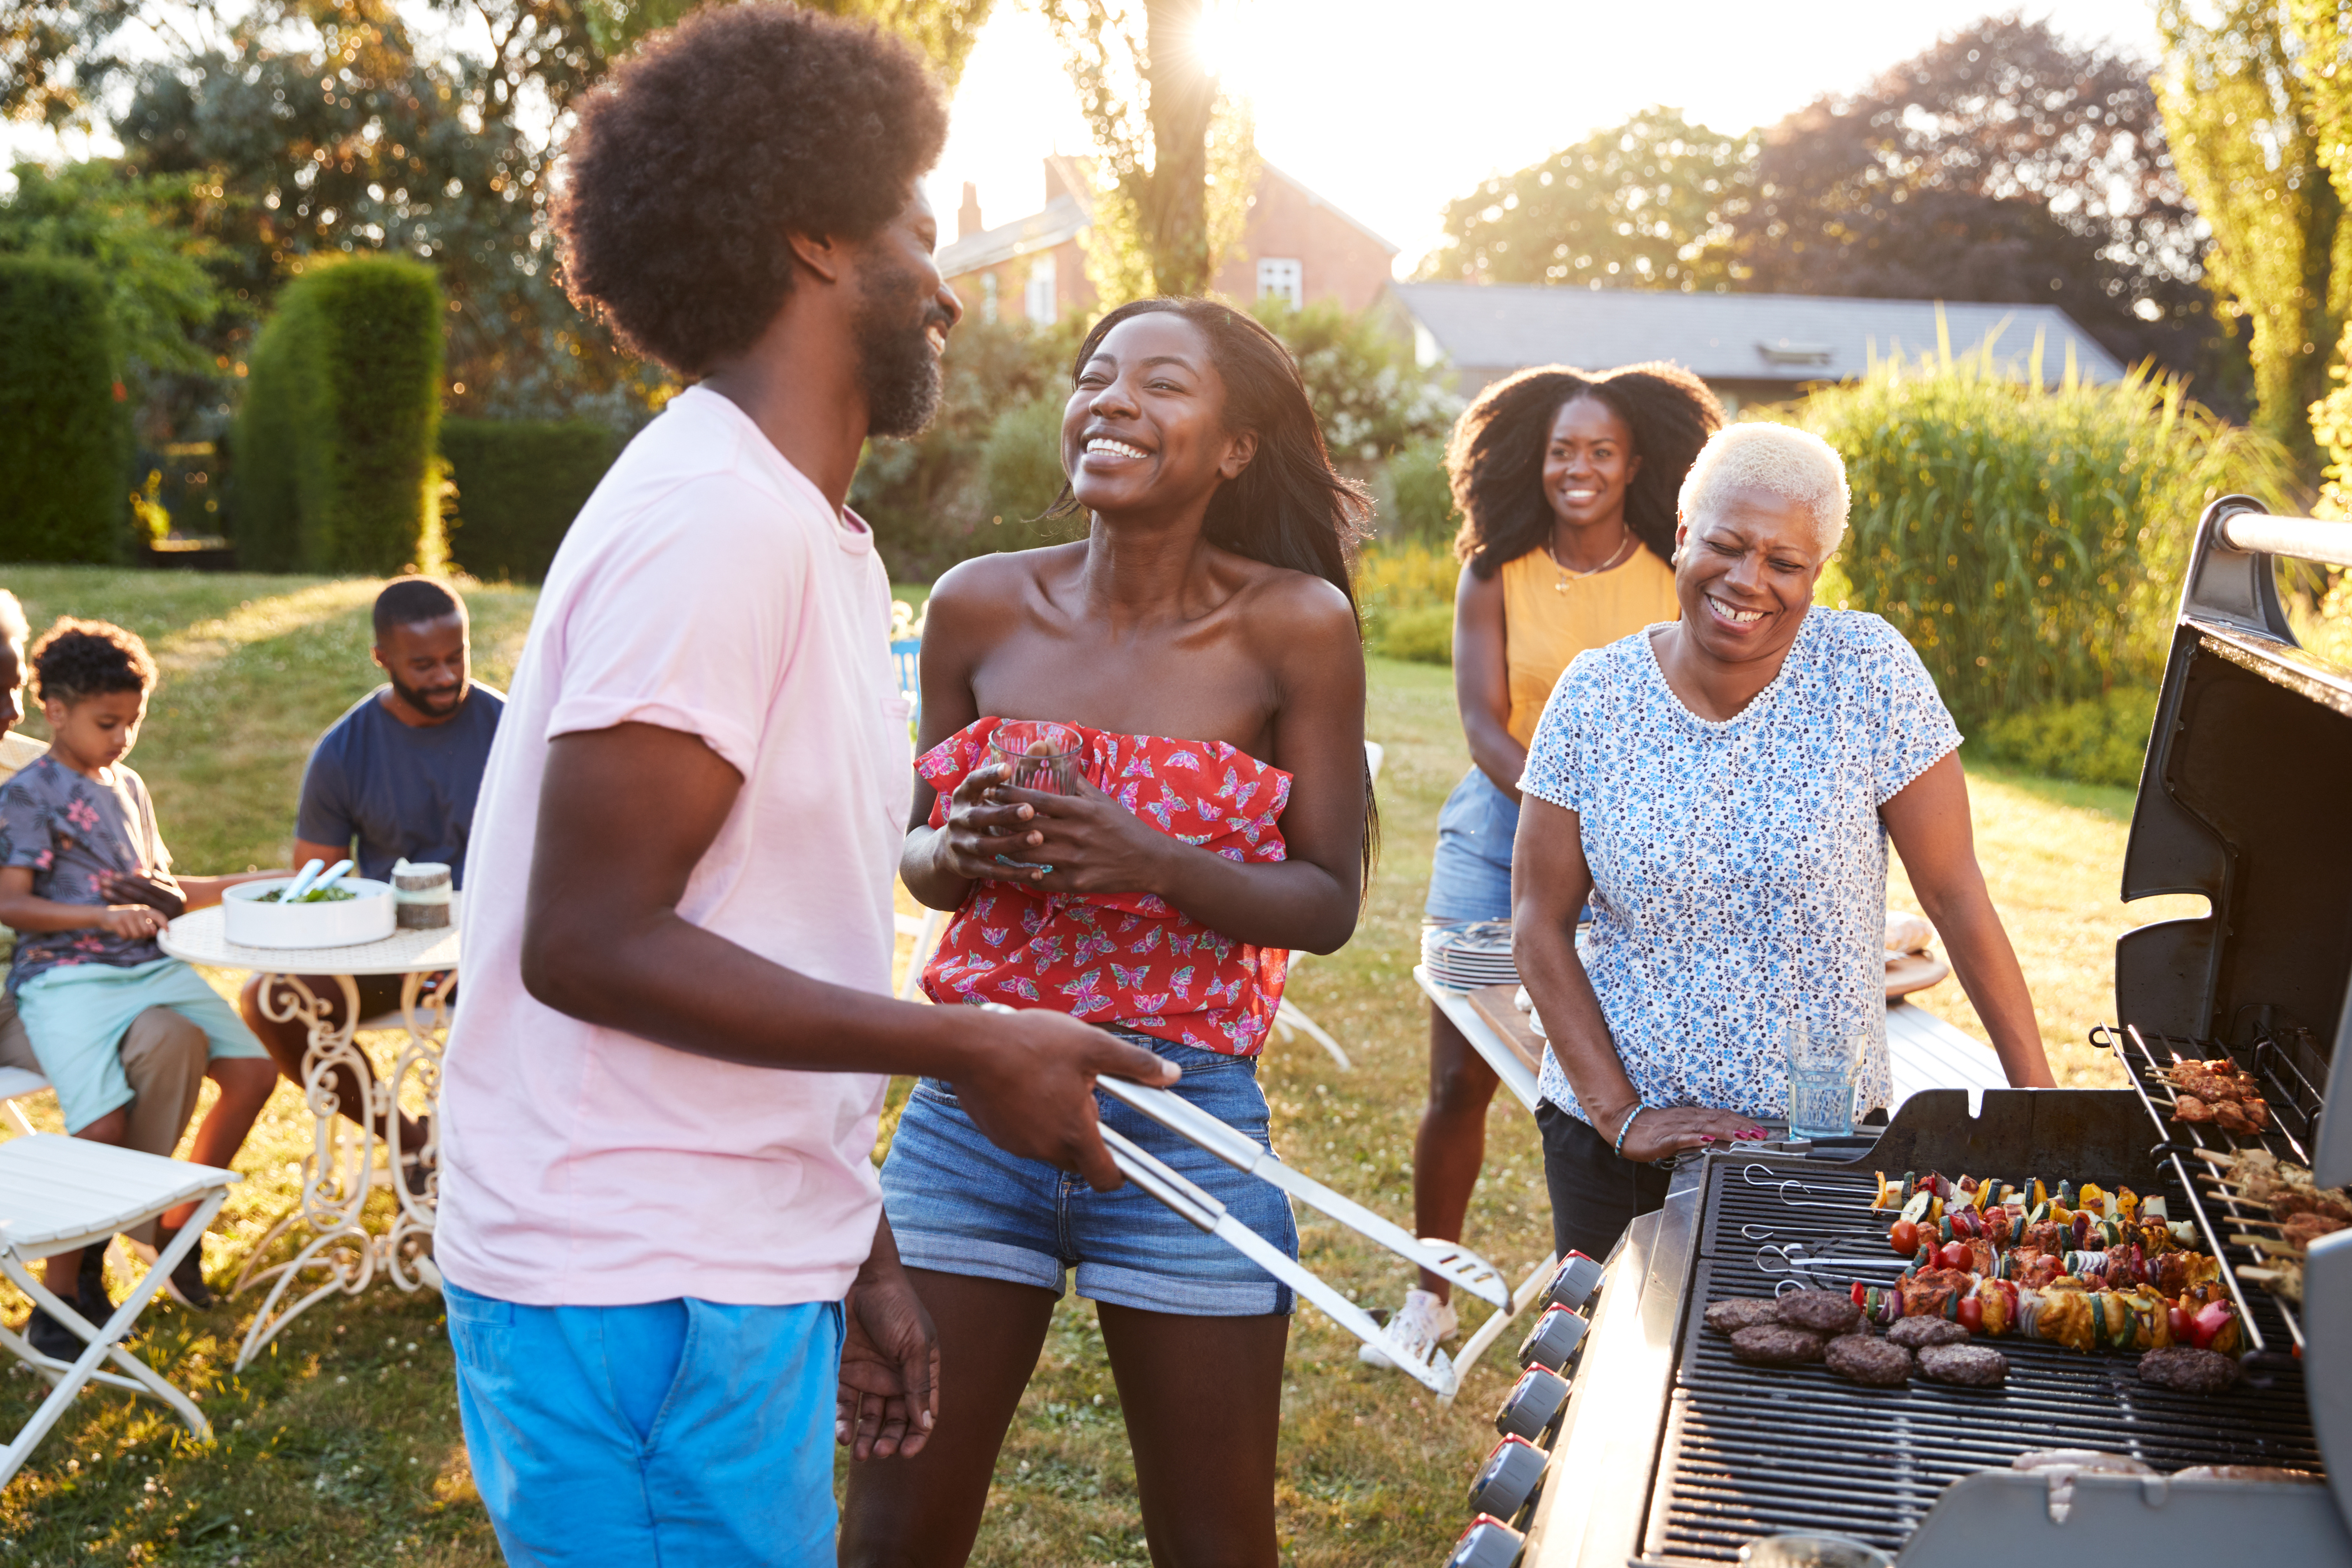 A family joyously spending time together outside for Memorial day while using a grill.